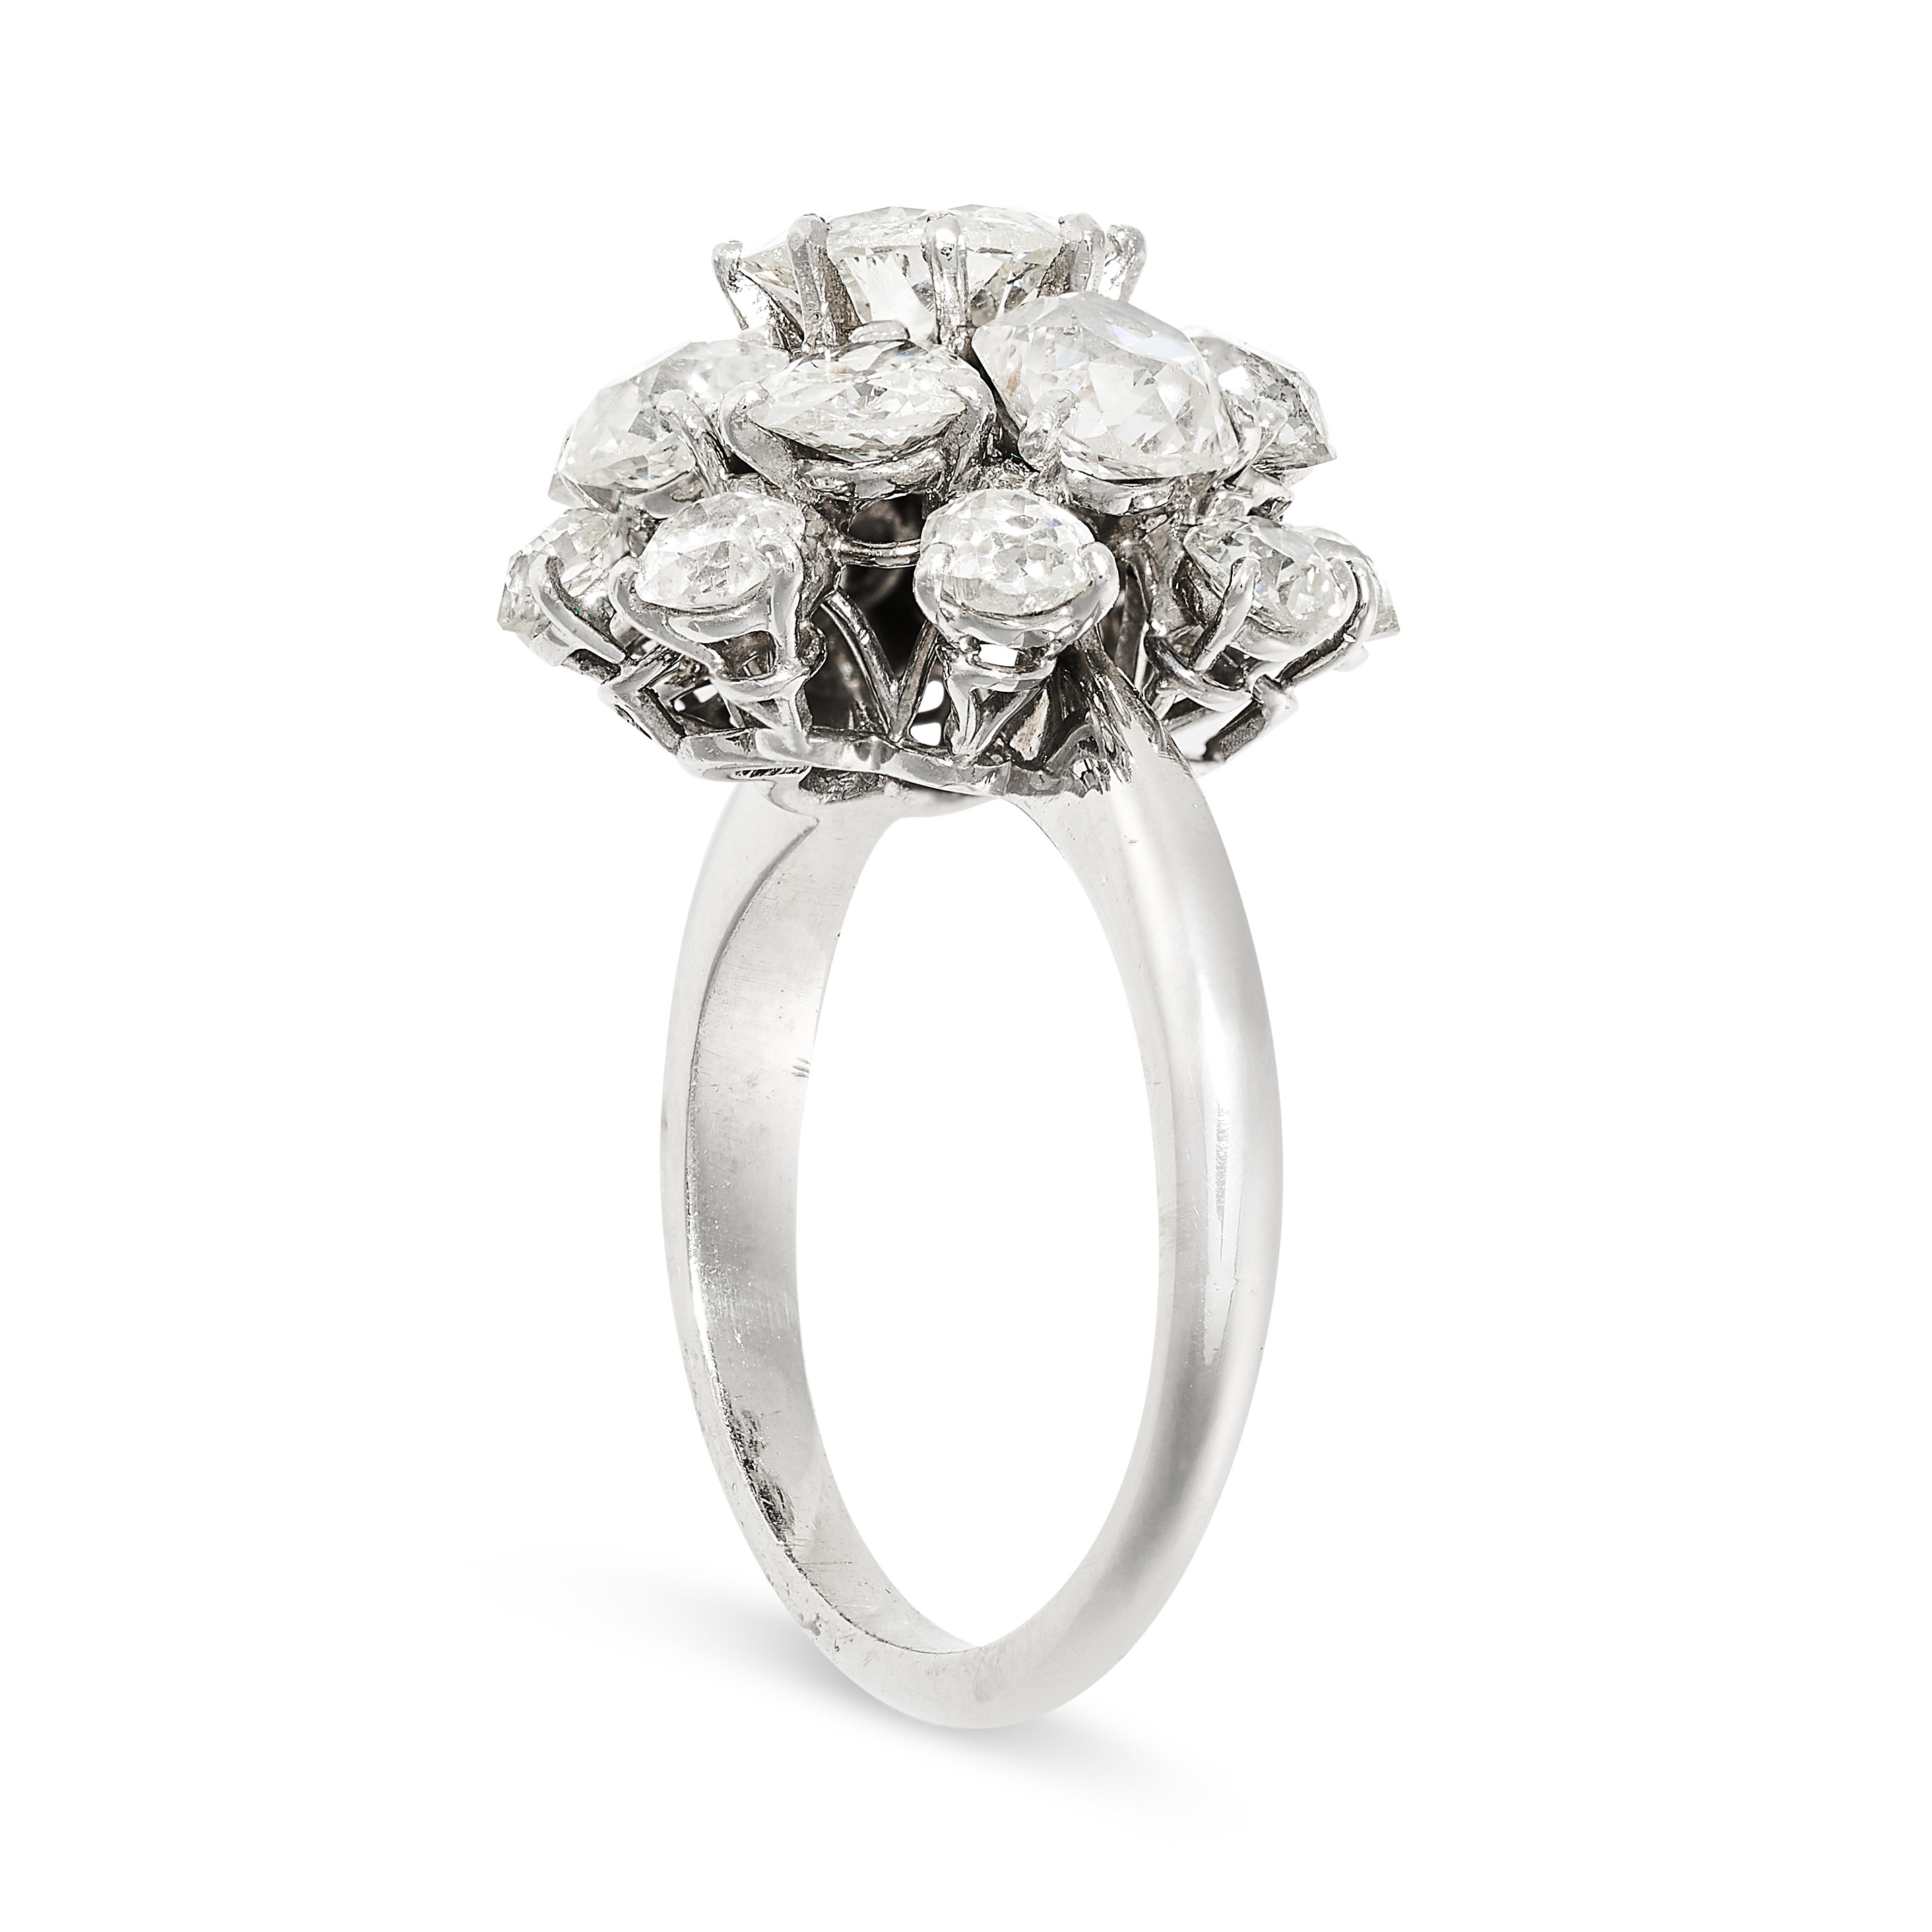 A FRENCH DIAMOND CLUSTER RING in platinum, set with a central old cut diamond of 1.10 carats, within - Image 2 of 2